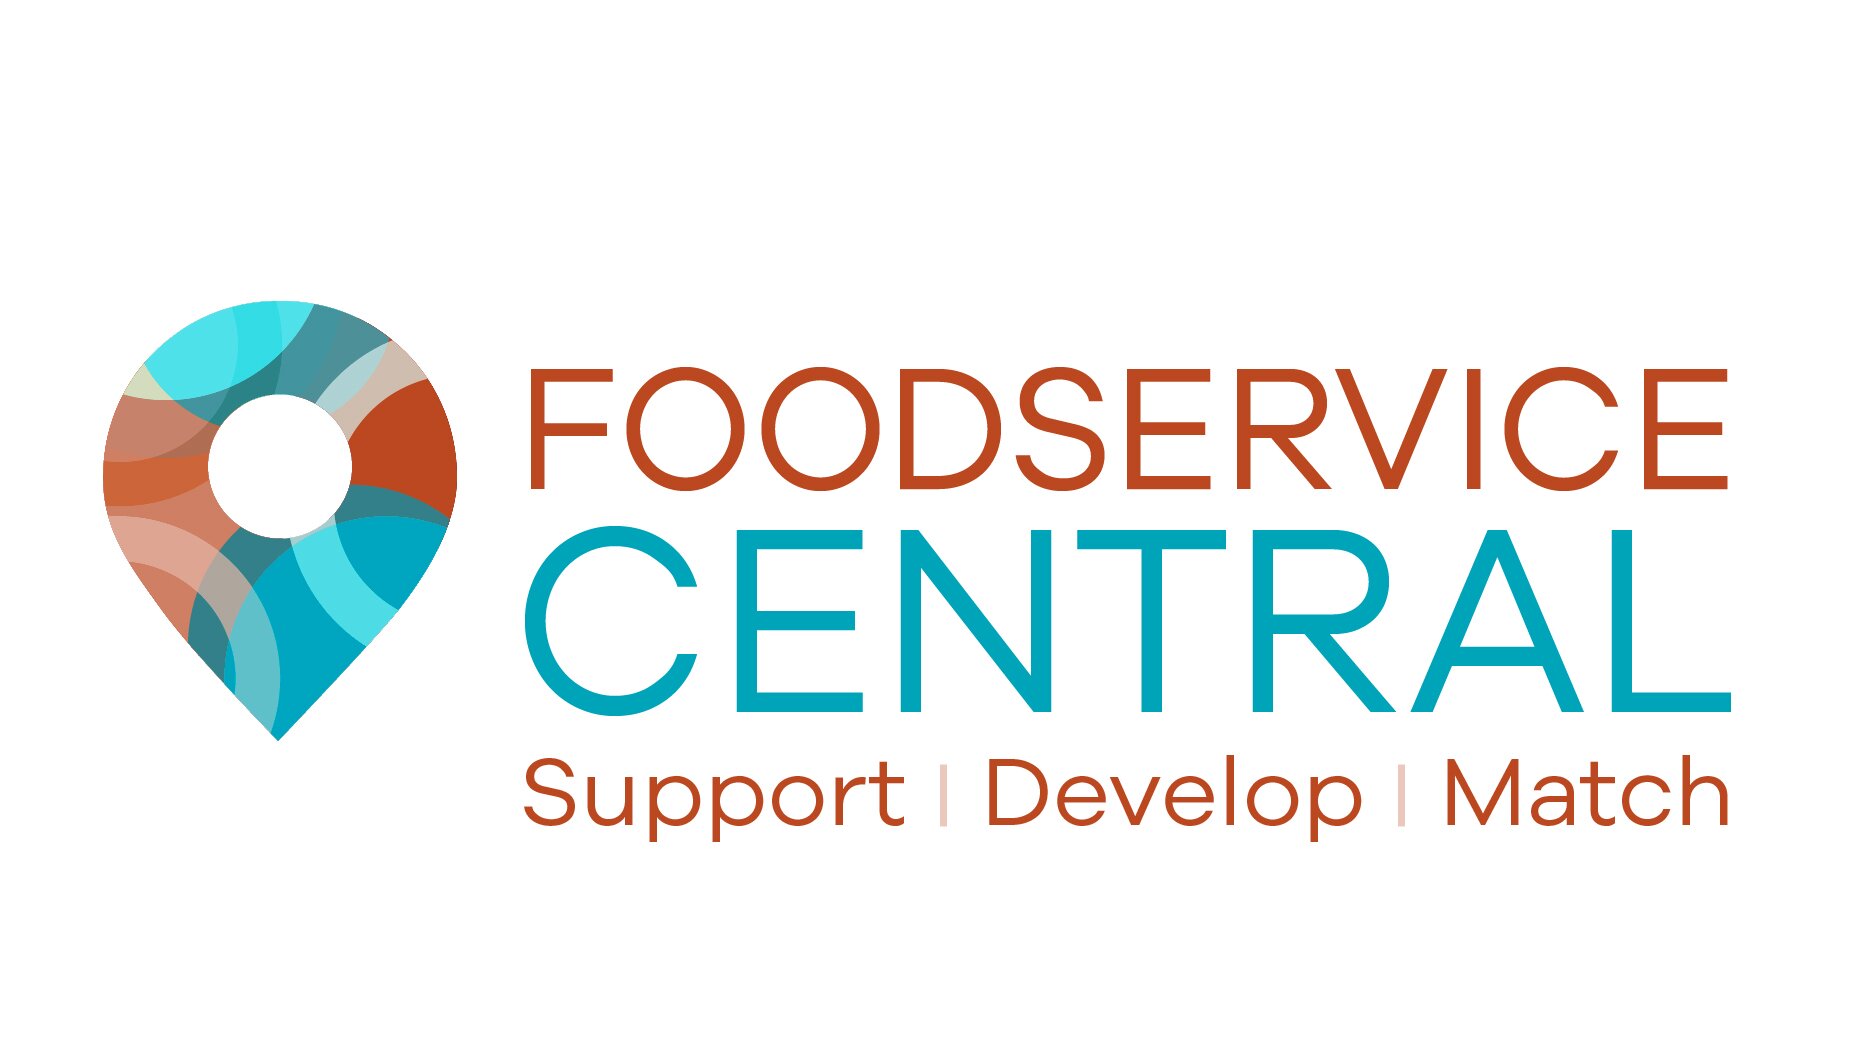 Foodservice Central jobs board aims to connect industry experts